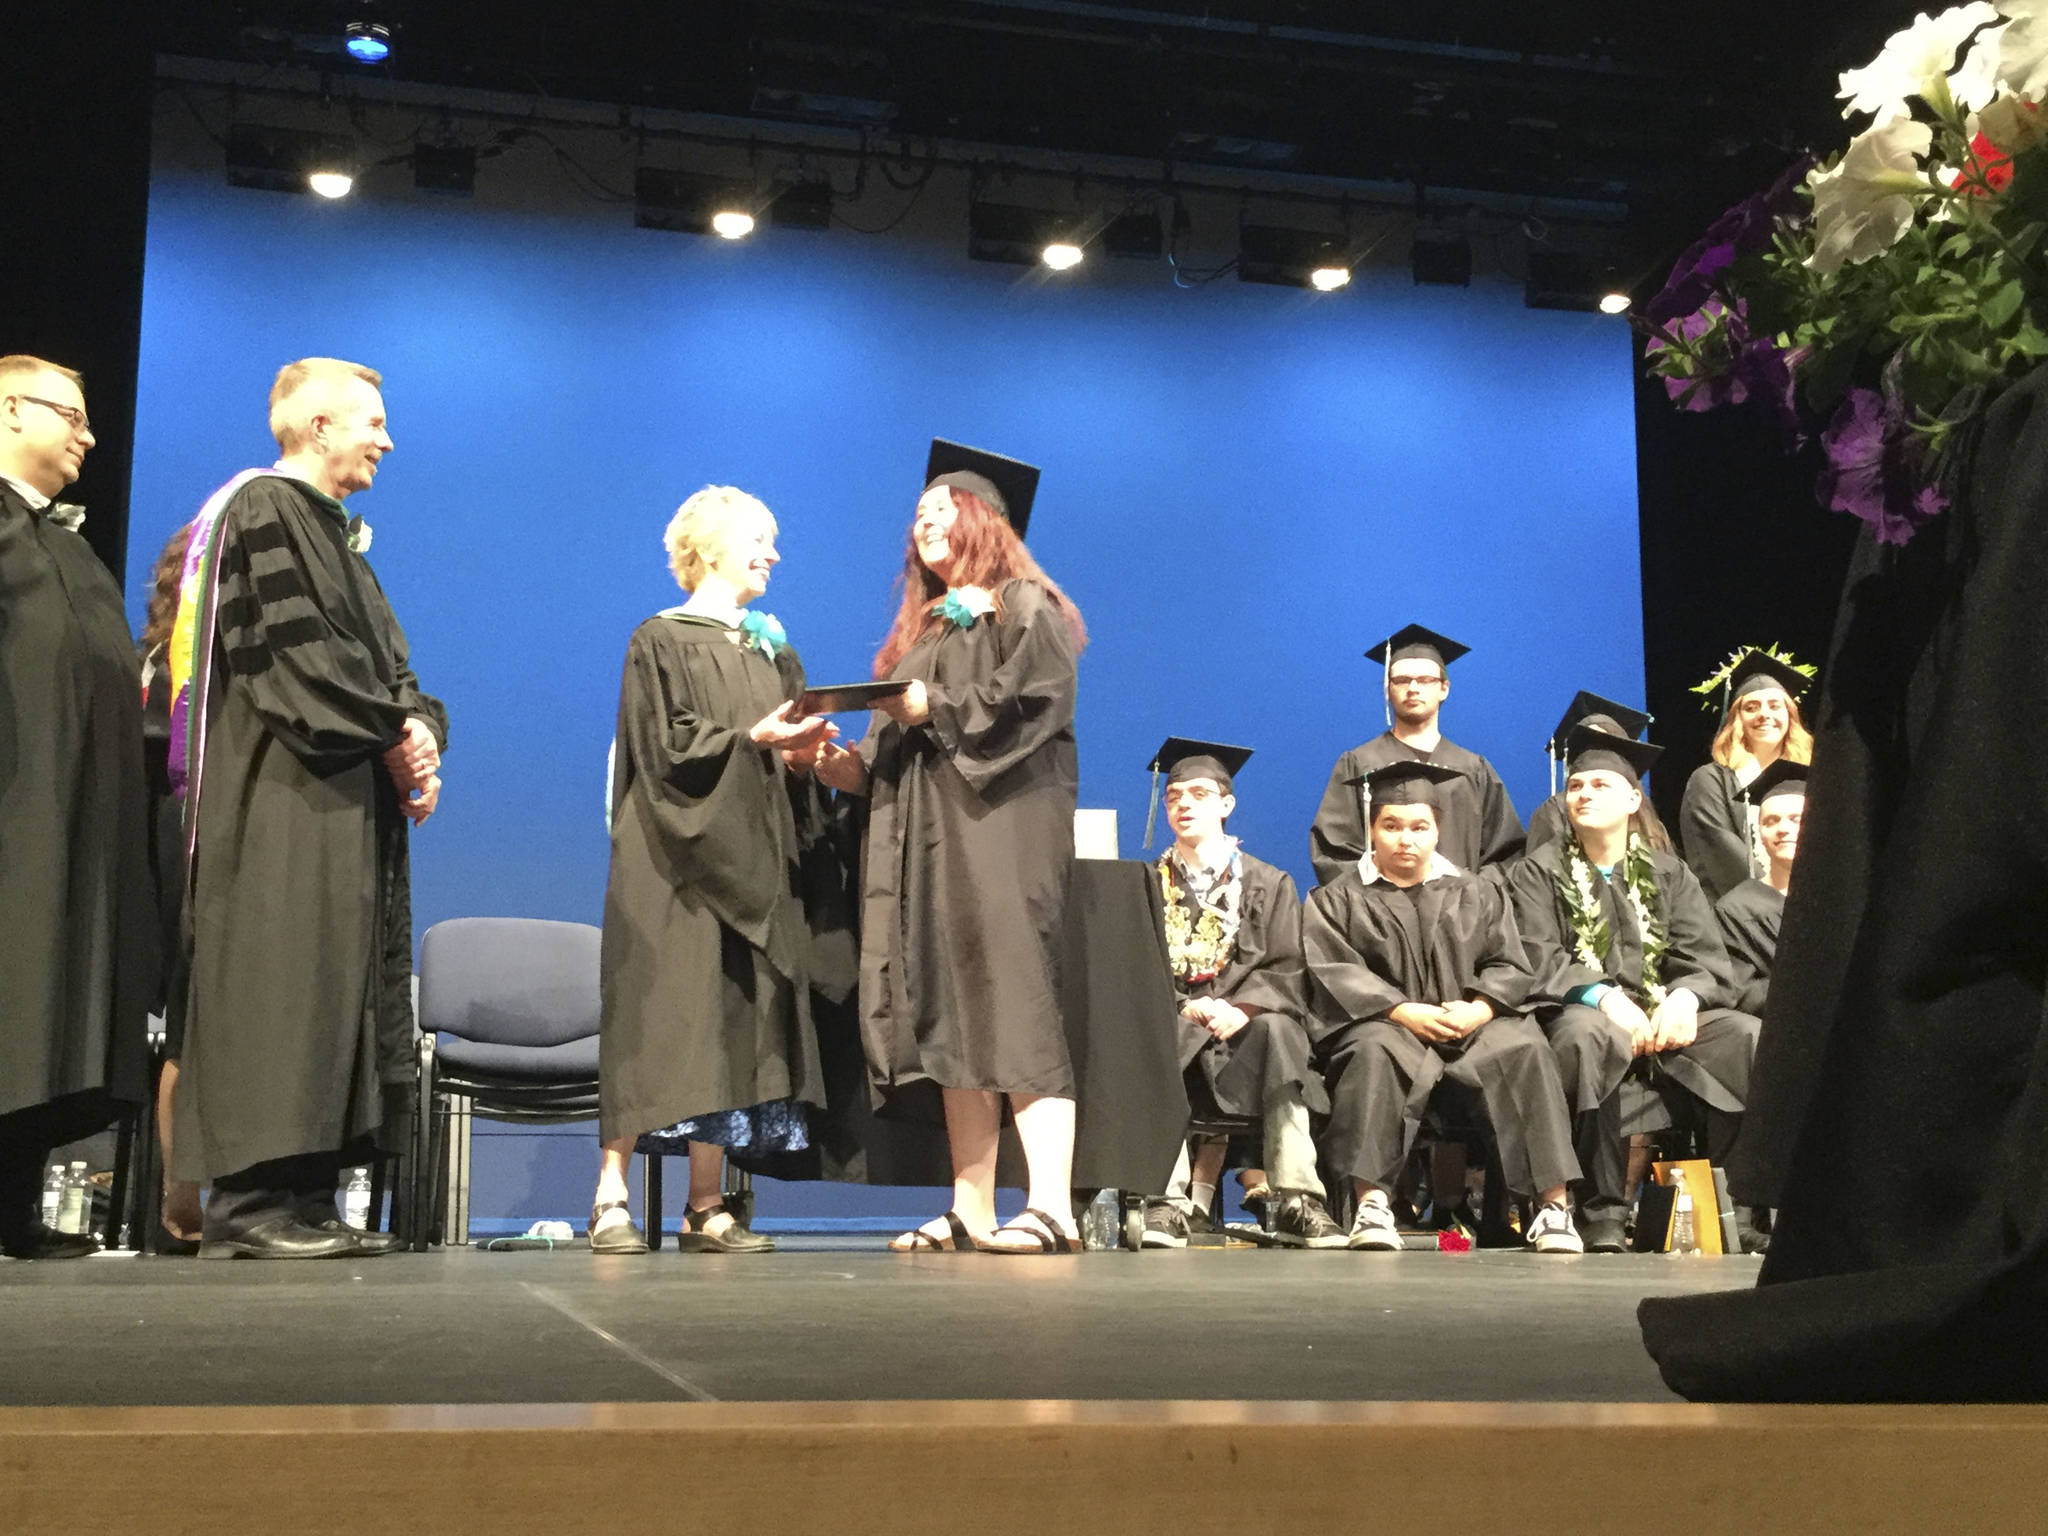 Weston High School graduate Alexis Myers receives her diploma from school board member Judy Fay, a former teacher, and fellow board members Jeff Huleatt and Jim Weiss.